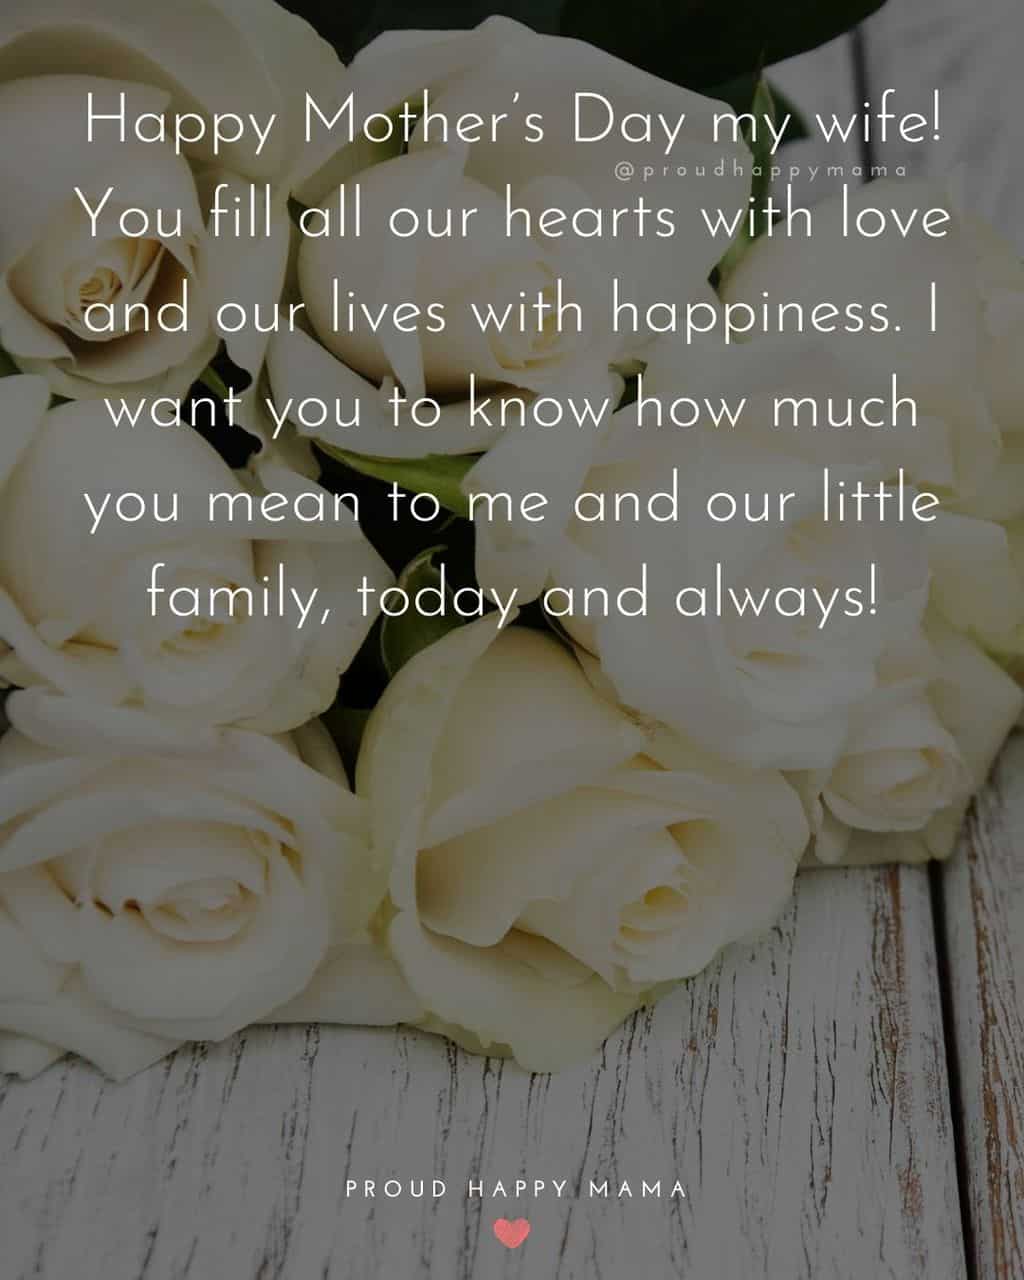 Happy Mothers Day Quotes For Wife - Happy Mother’s Day my wife! You fill all our hearts with love and our lives with happiness.